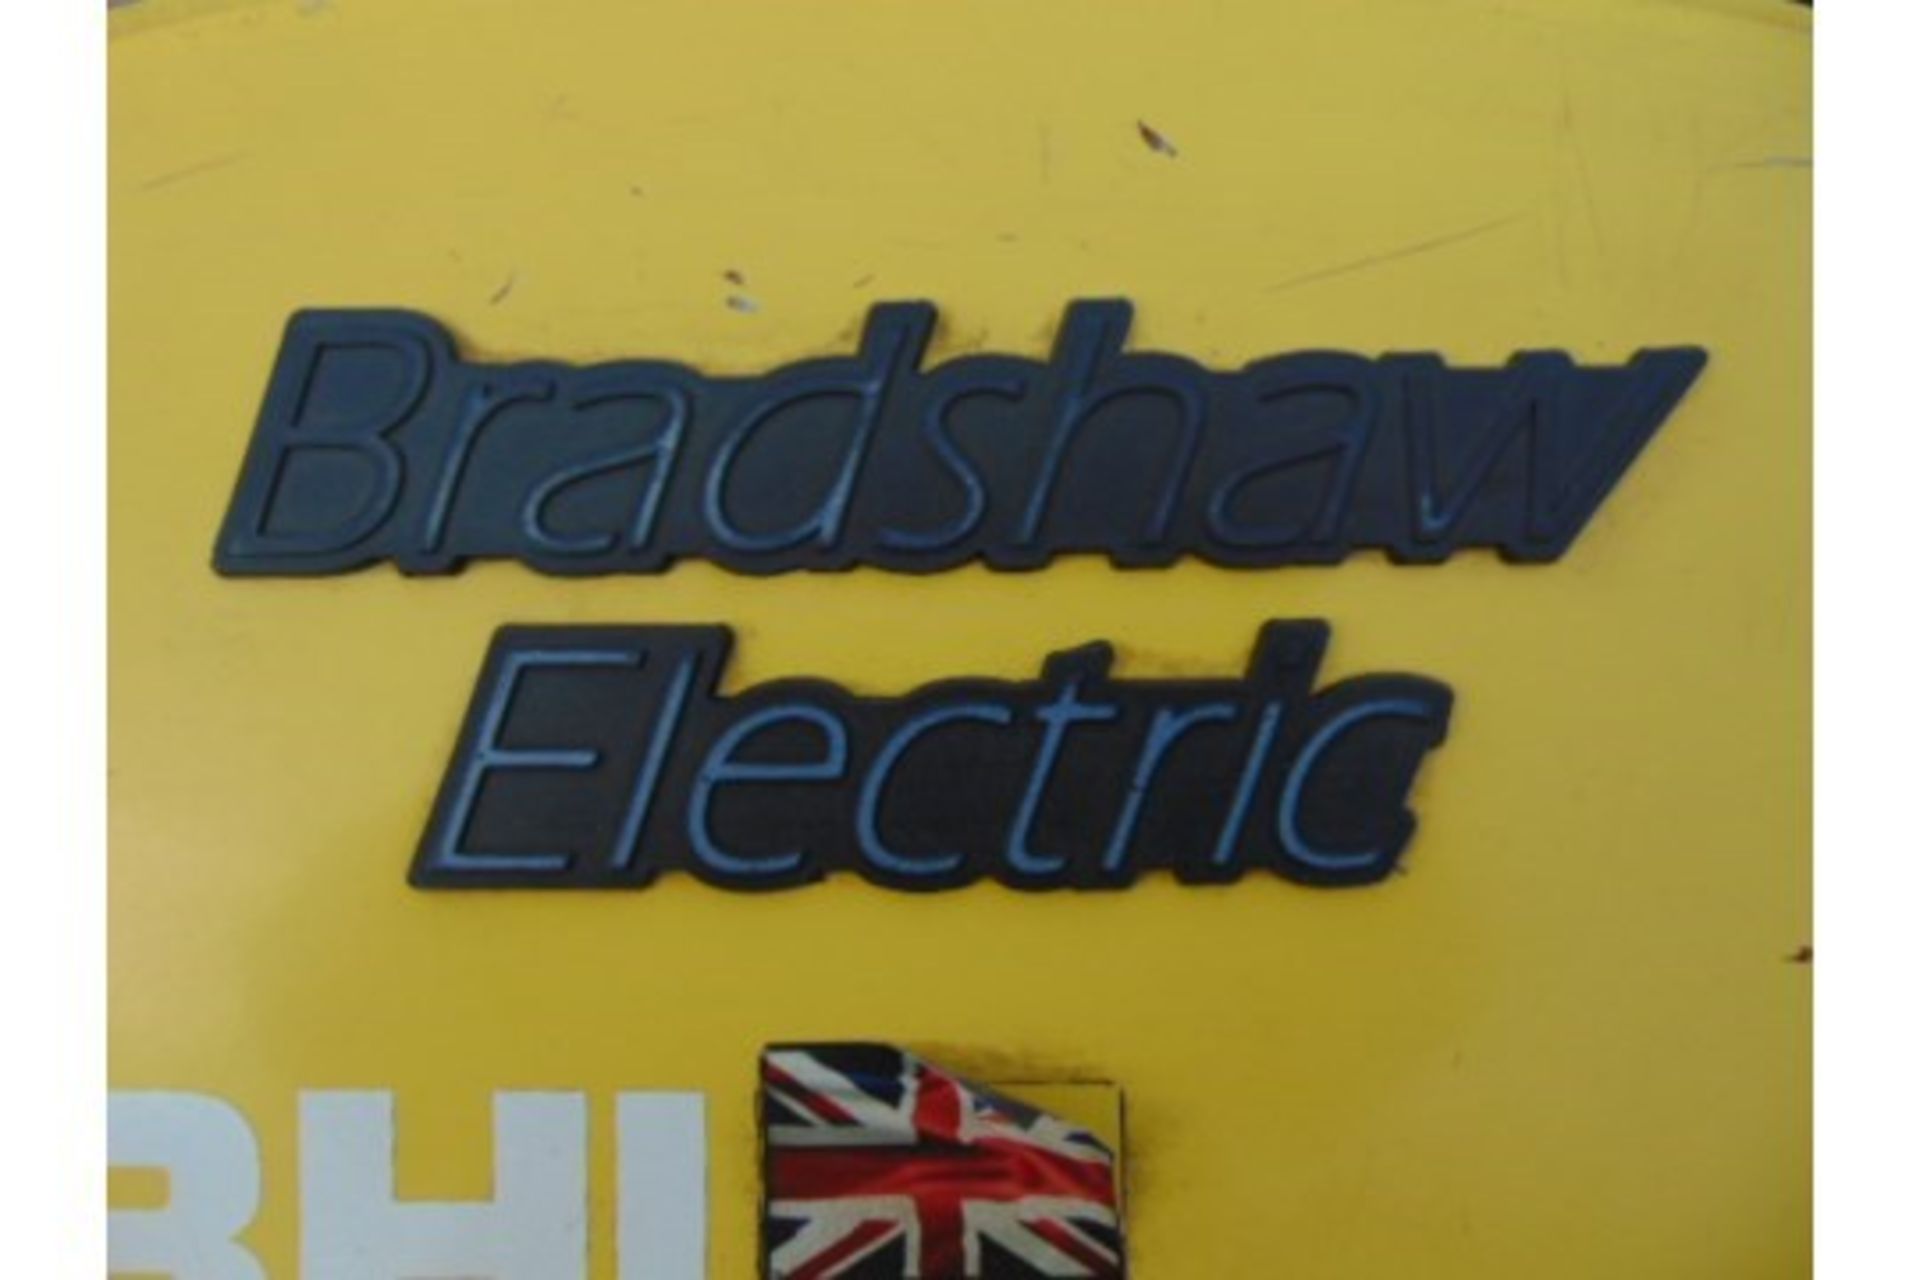 2010 Bradshaw T5 5000Kg Electric Tow Tractor c/w Battery Charger - Image 8 of 11